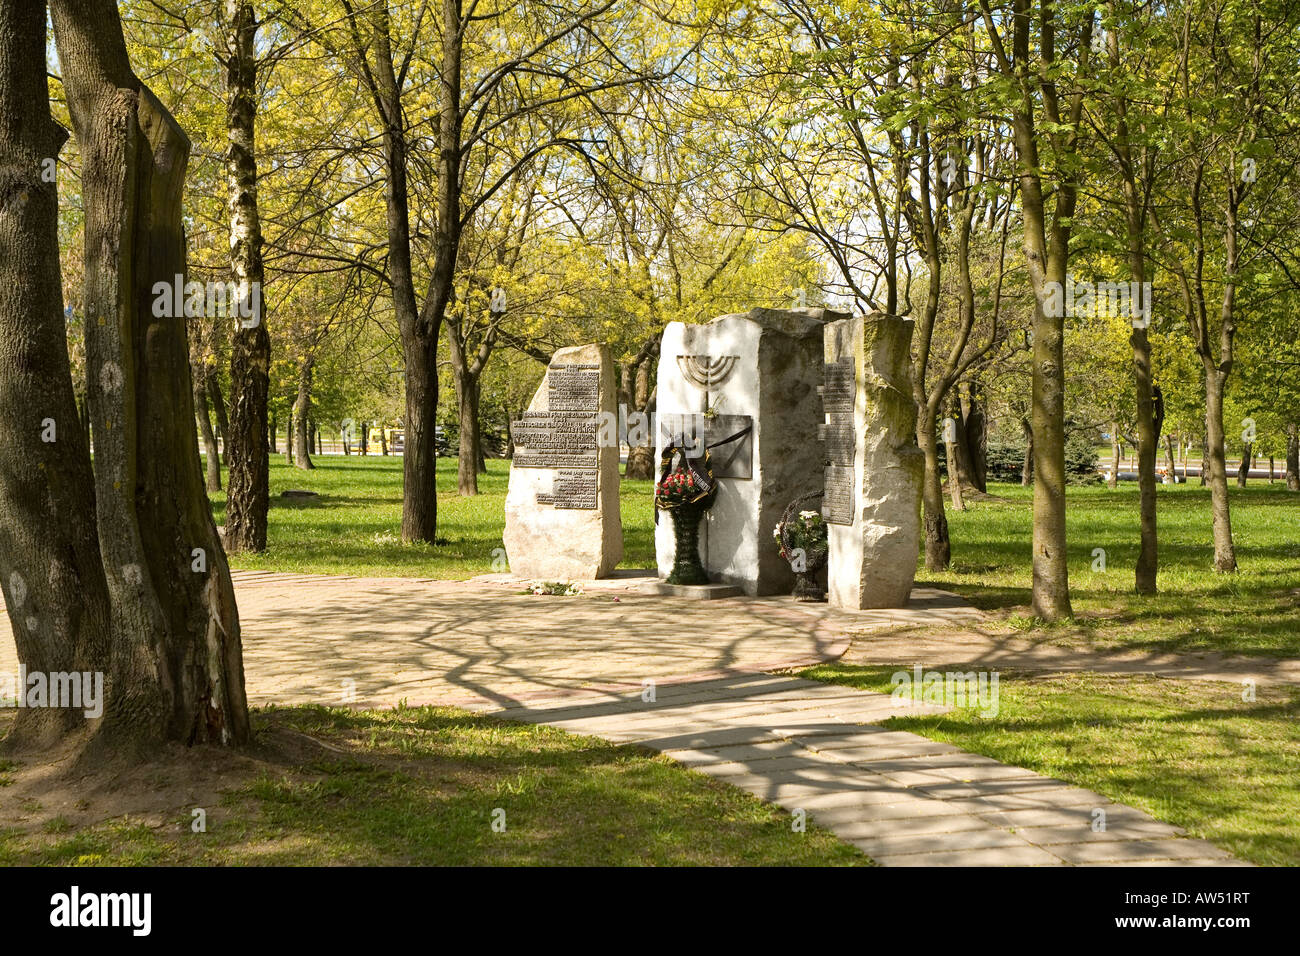 The old Jewish cemetery and holocaust memorial that is now a public park in Minsk Belarus Stock Photo